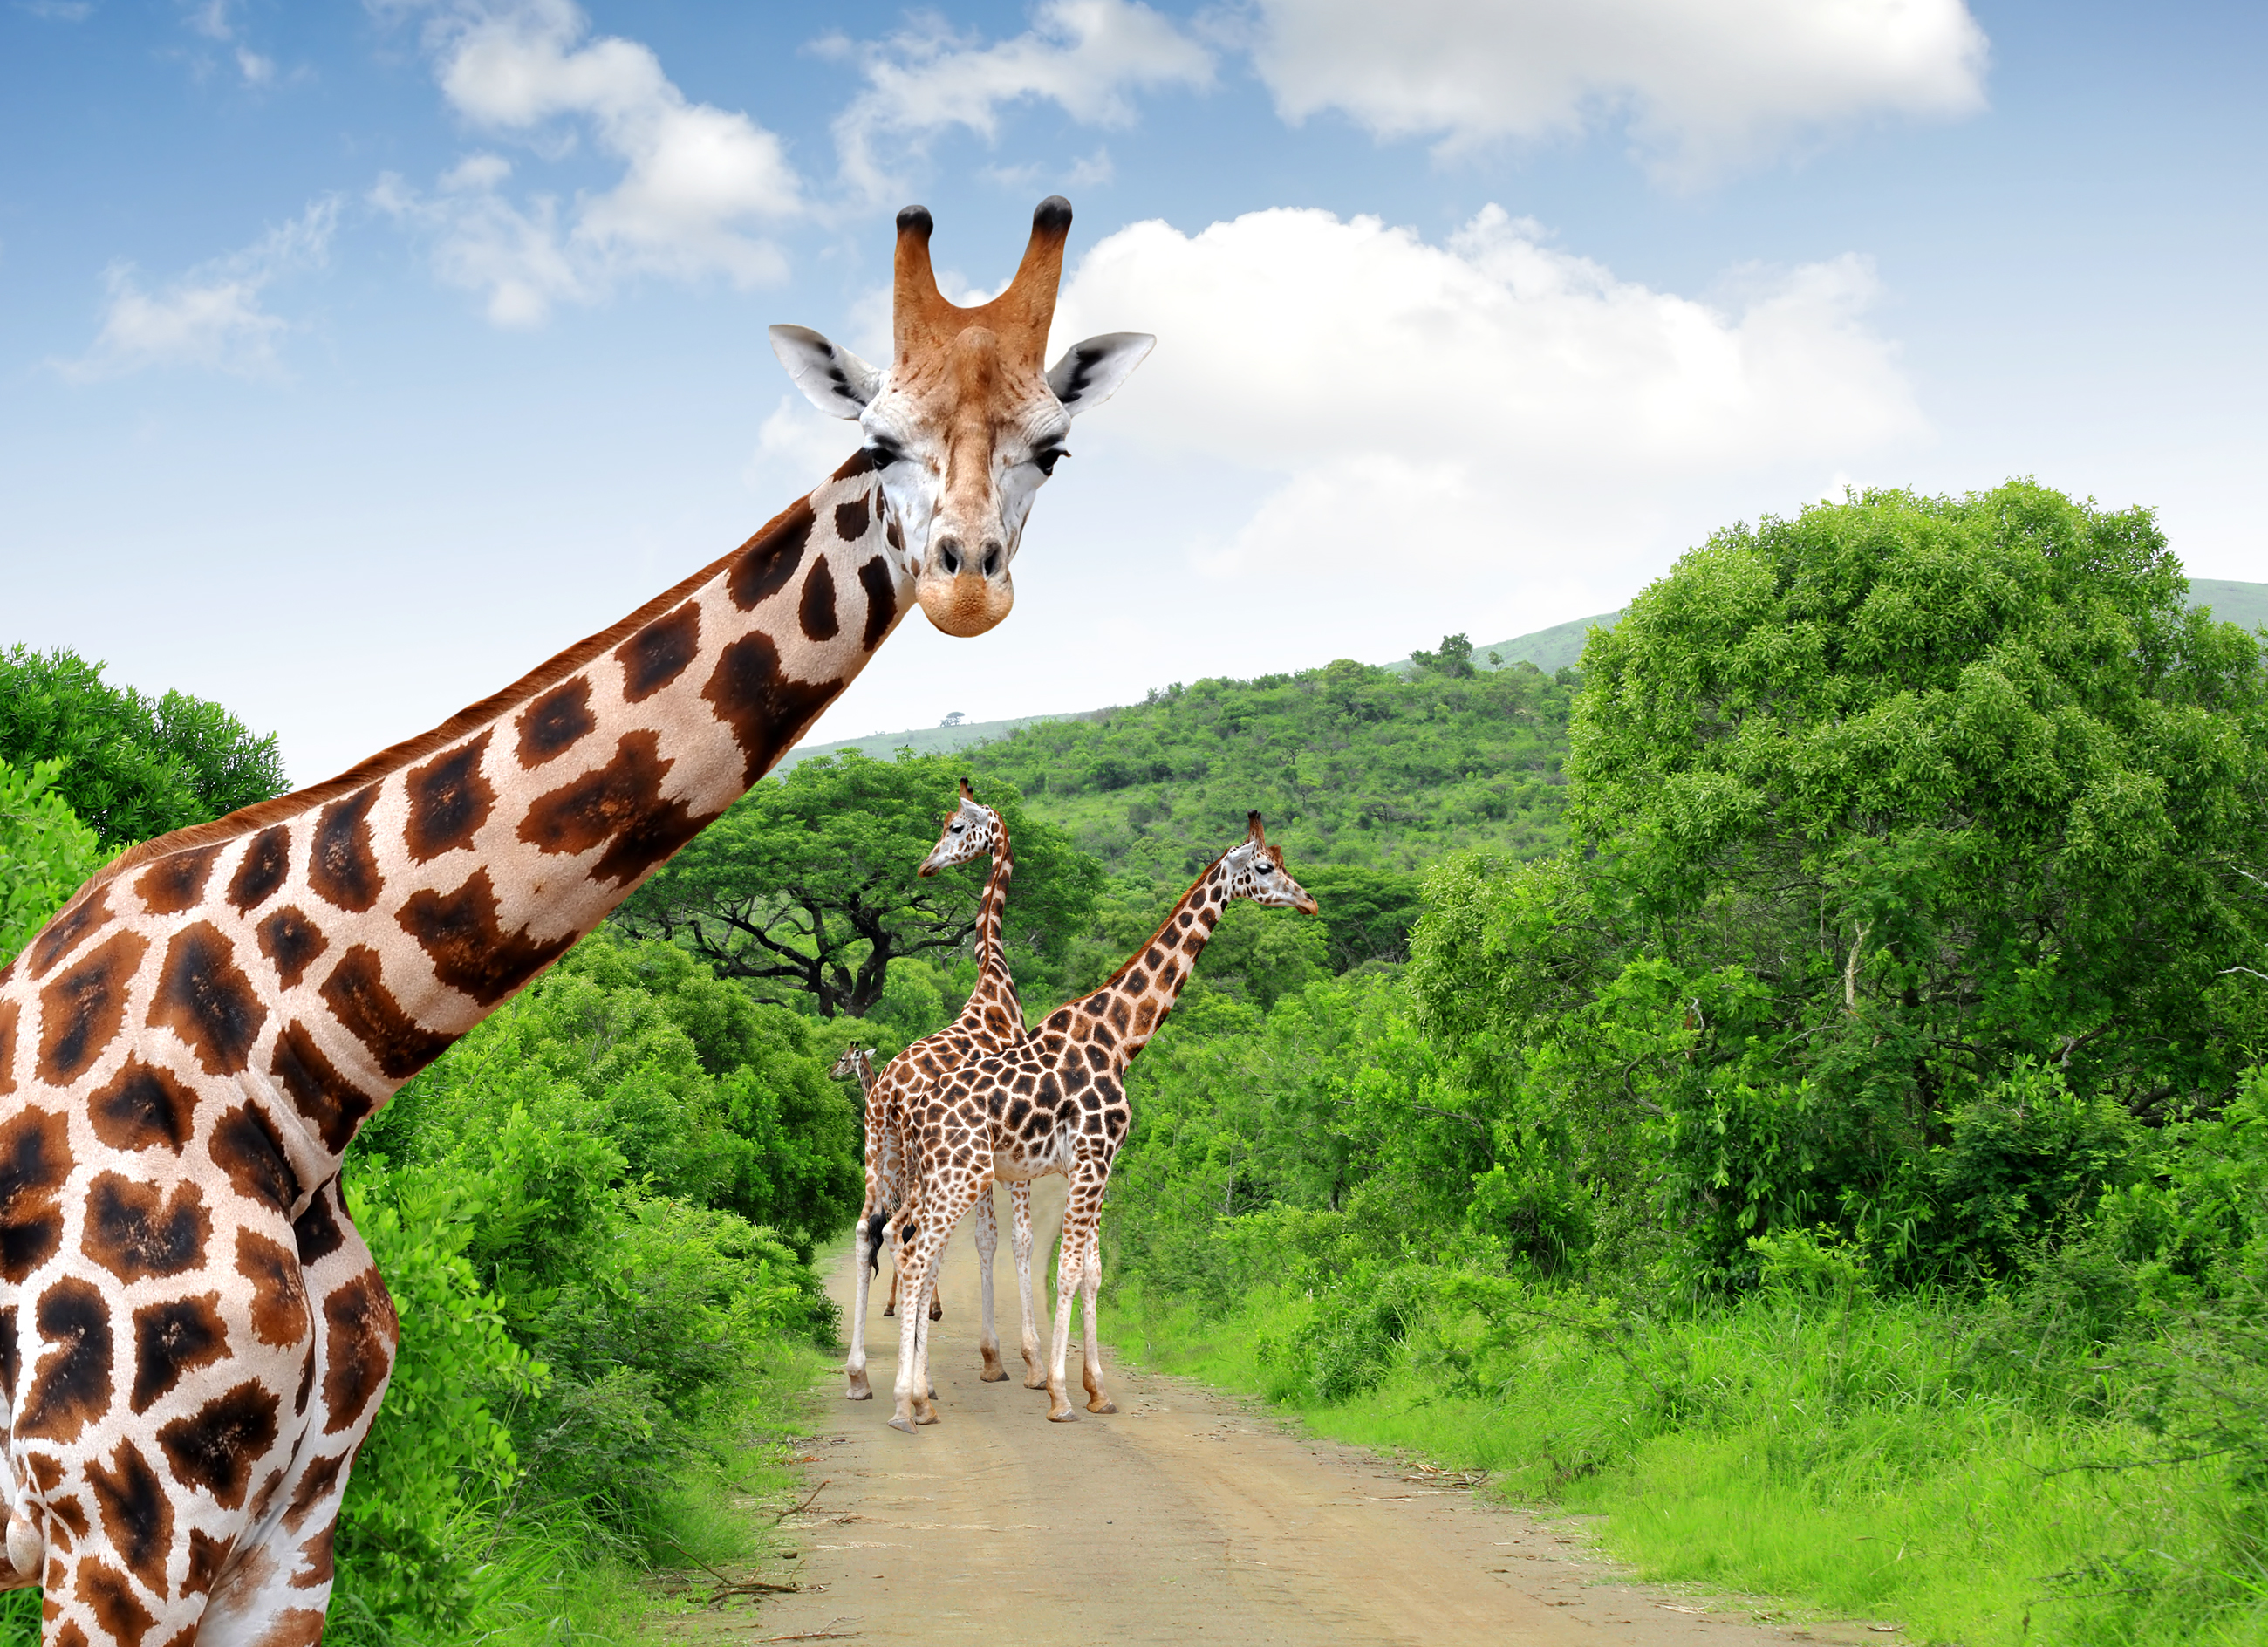 Visit an Amazing Birthday Vacation Destination with Your Family - Giraffes in Kruger National Park